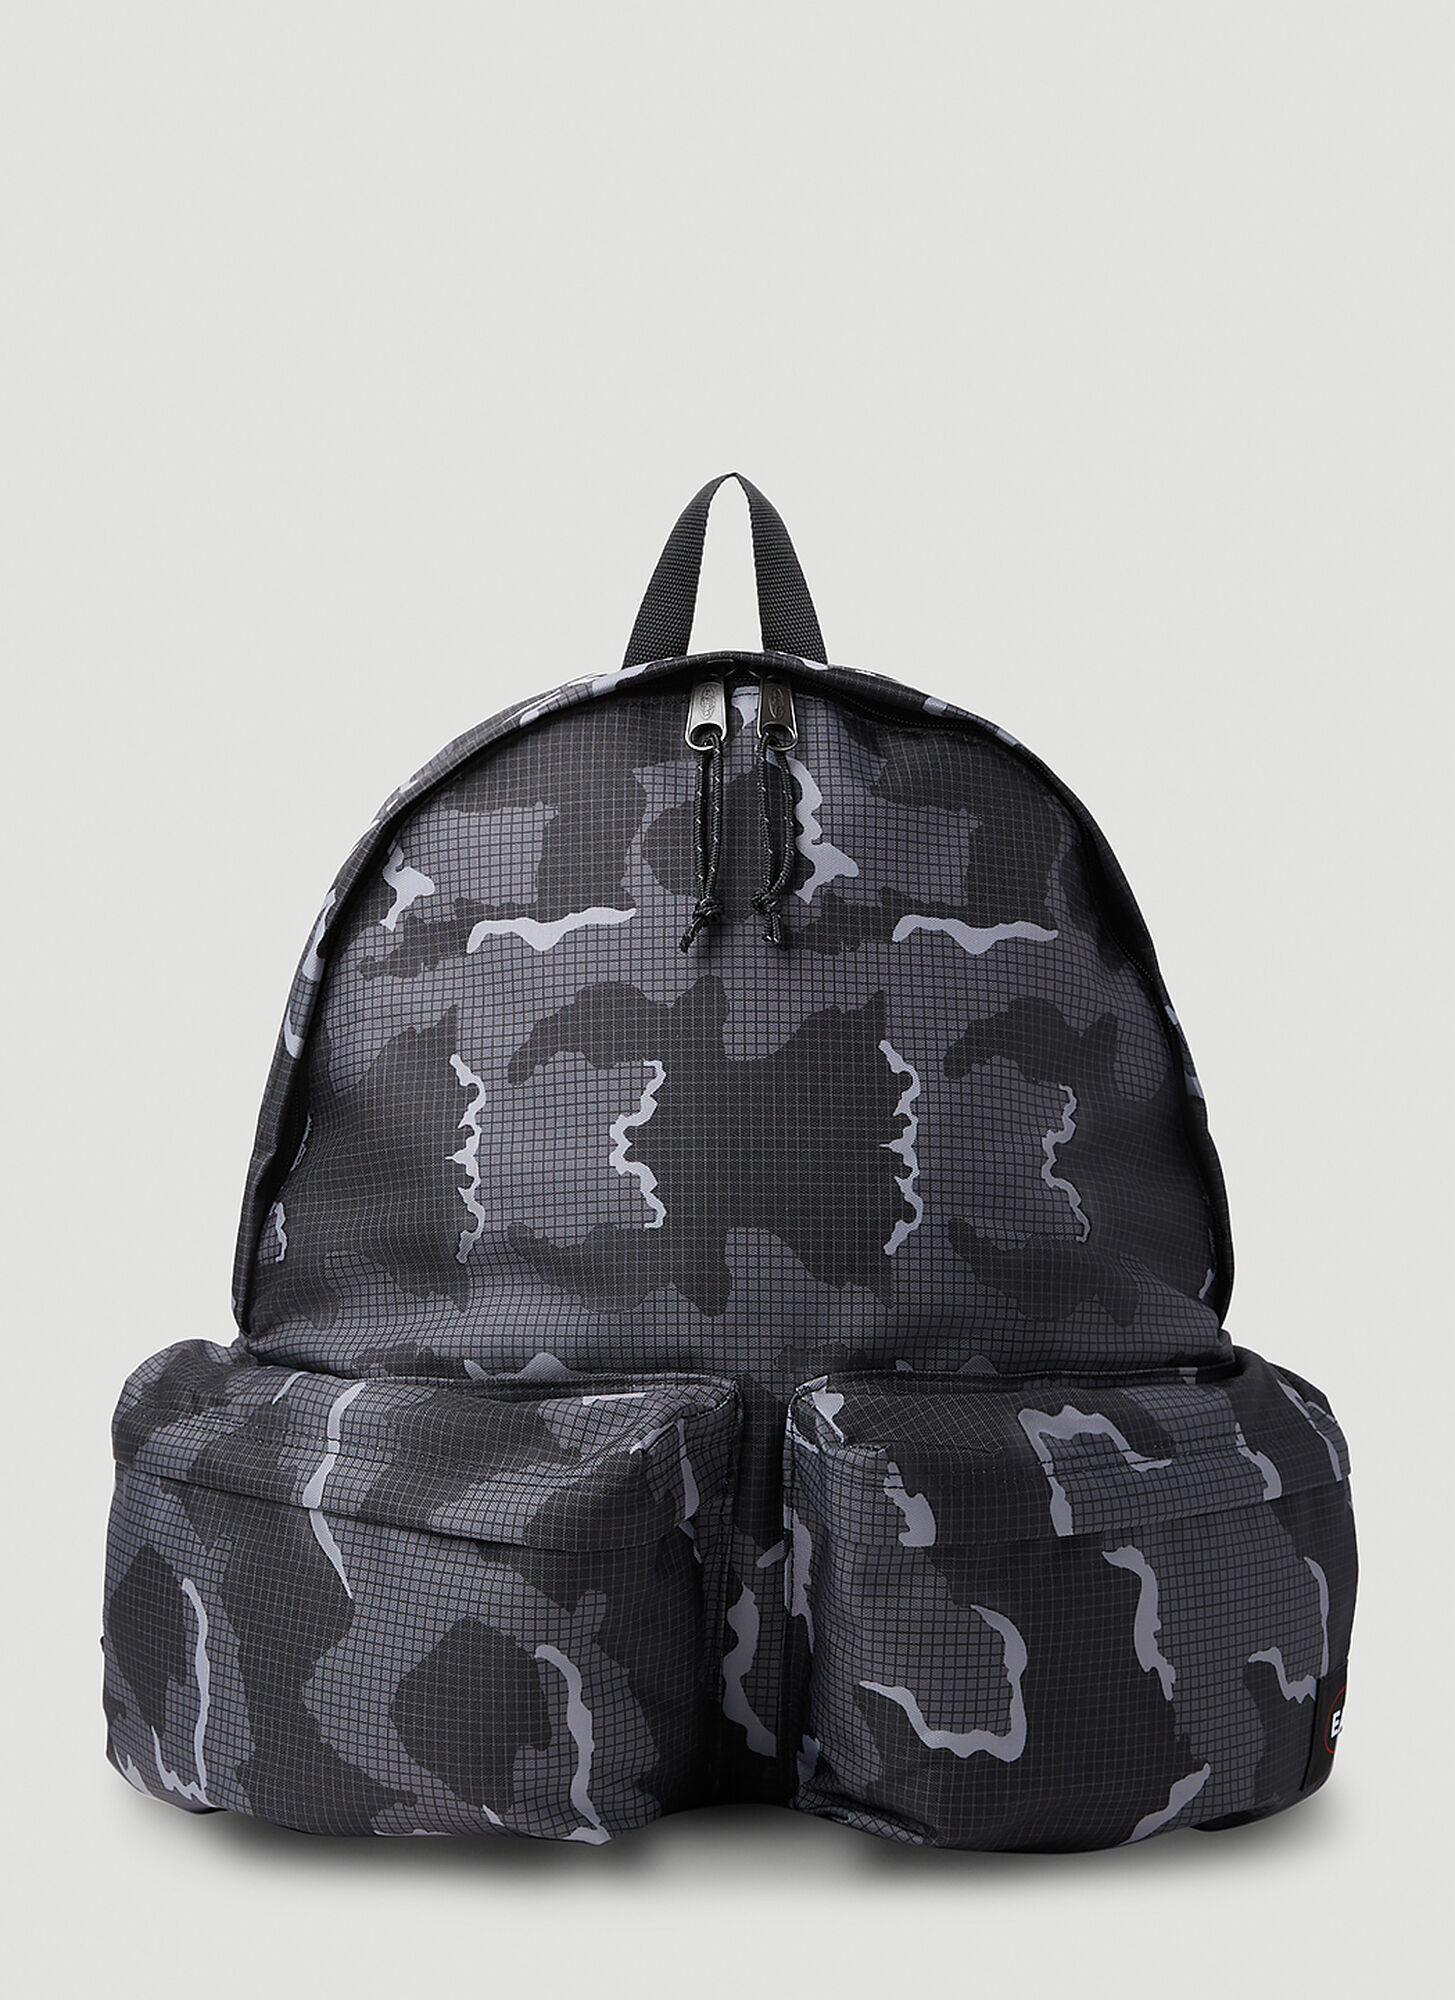 EASTPAK X UNDERCOVER EASTPAK X UNDERCOVER CAMOUFLAGE BACKPACK MALE BLACKMALE